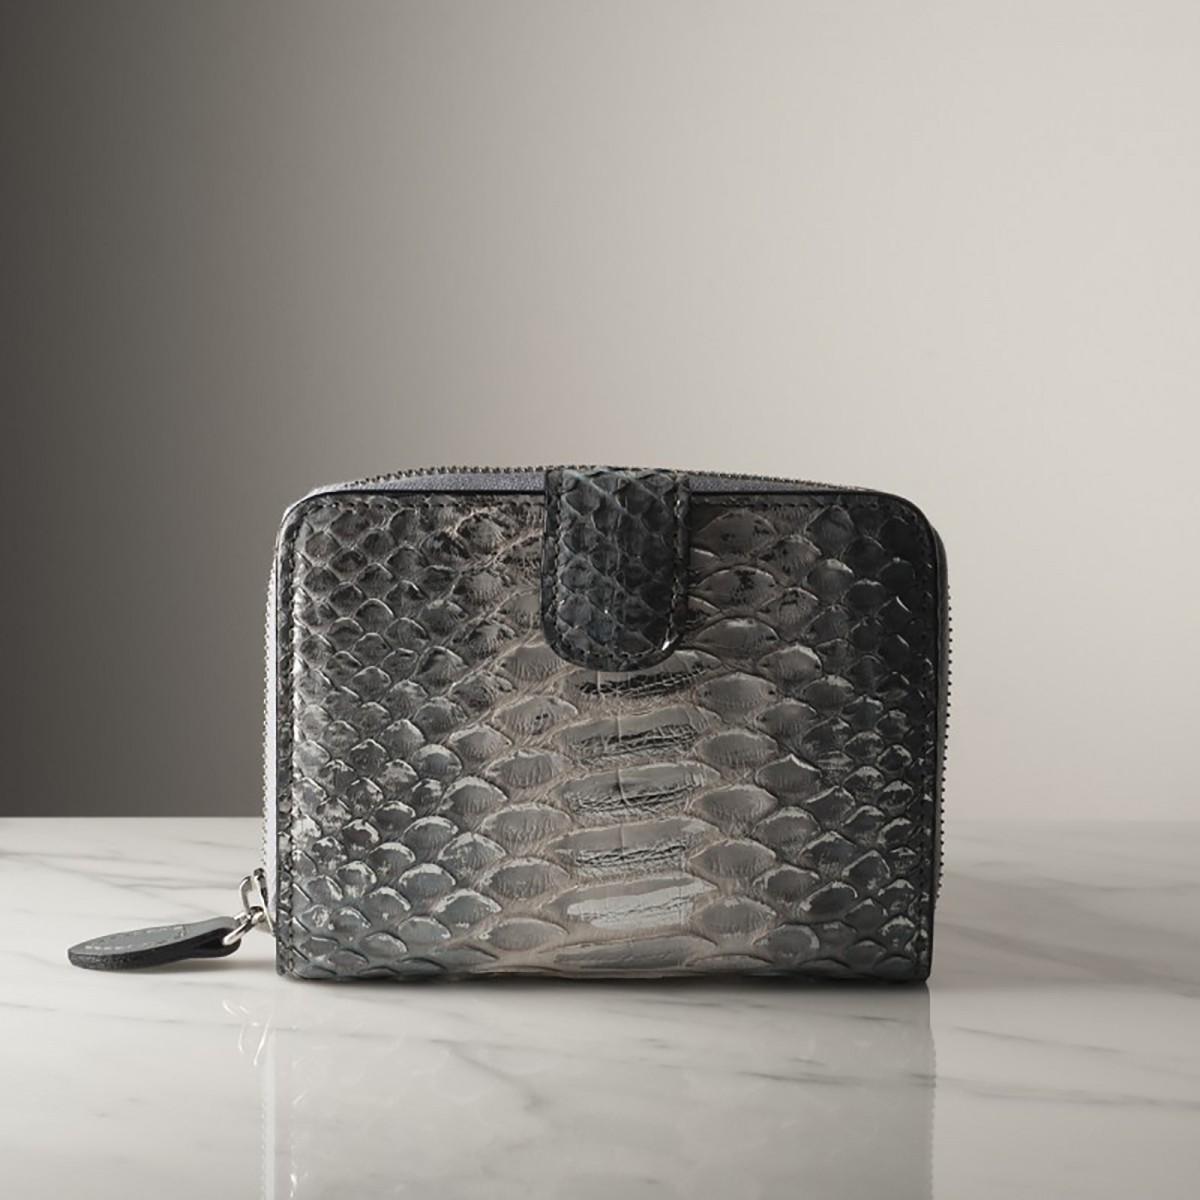 HUGUETTE PYTHON - Python leather wallet, handmade in Italy